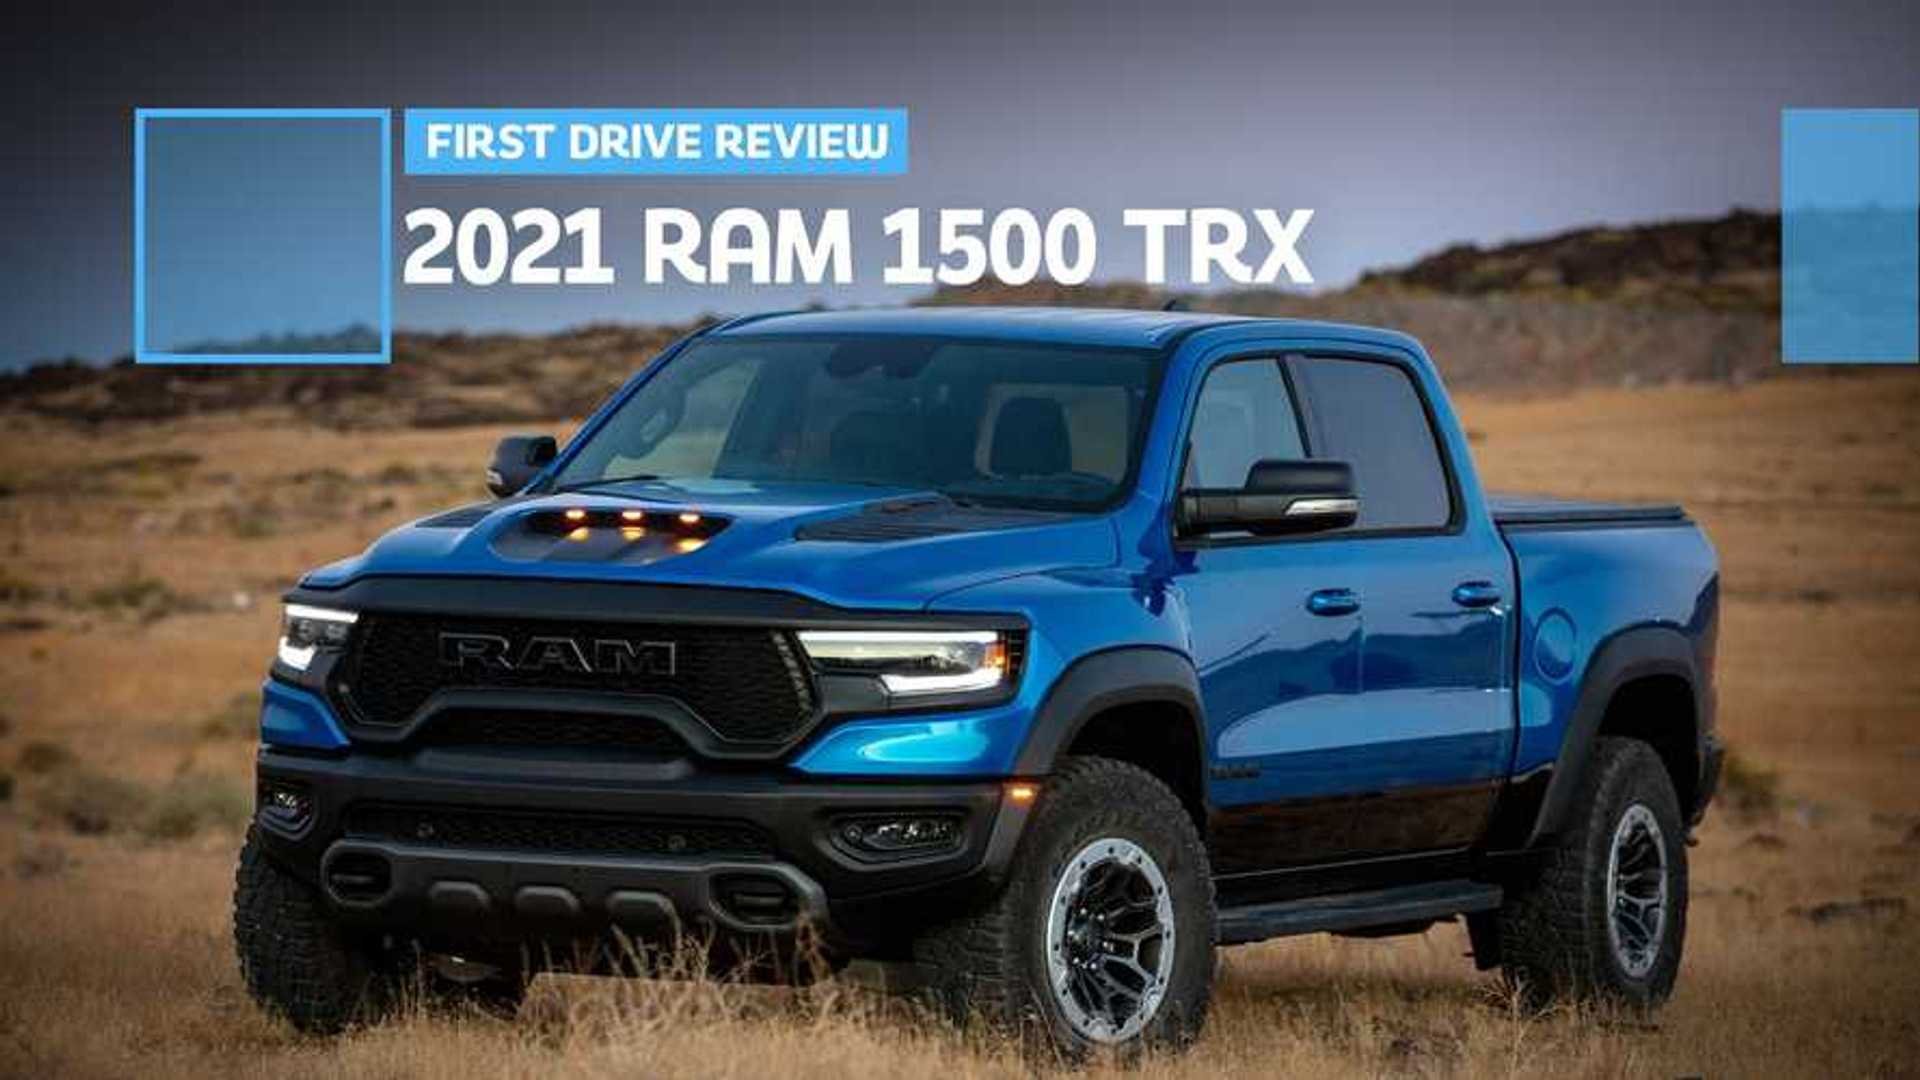 2021 Ram 1500 TRX First Drive Review: More Than An Engine